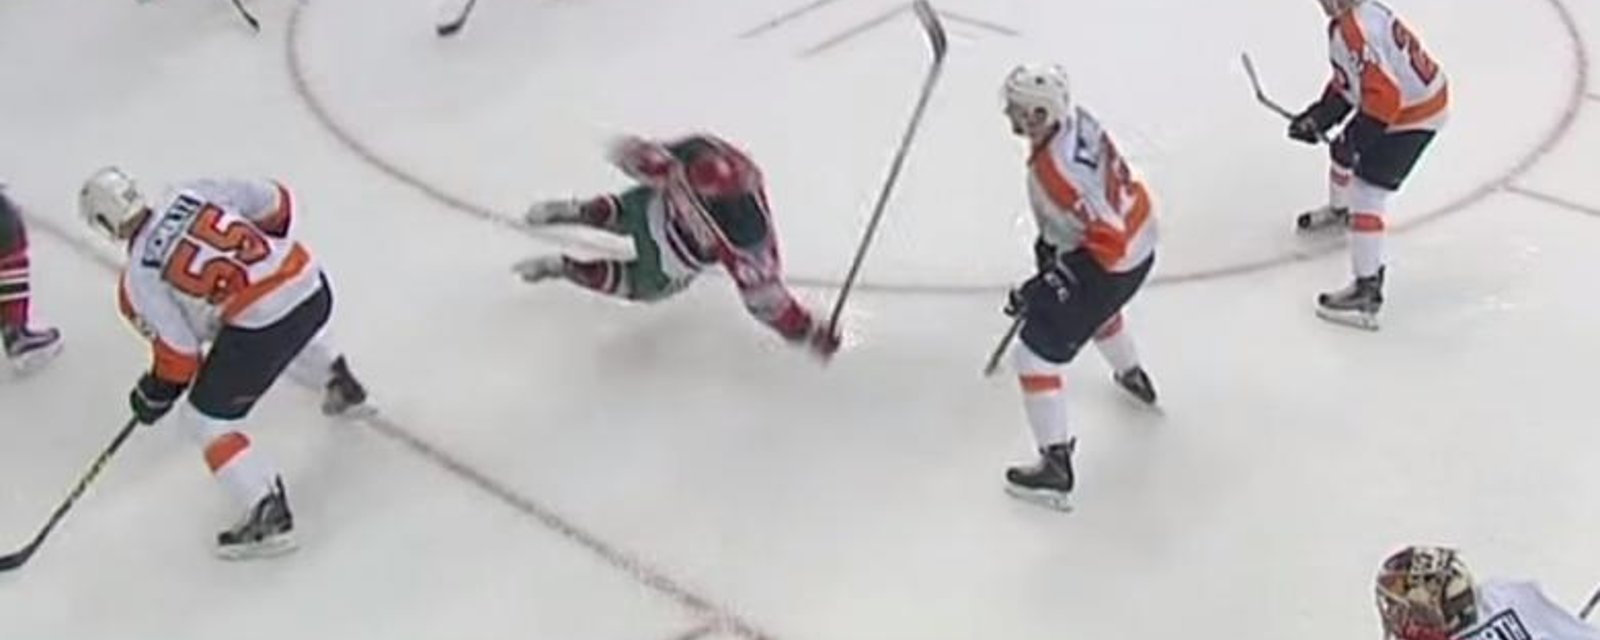 NHL announces two players have been fined for diving.